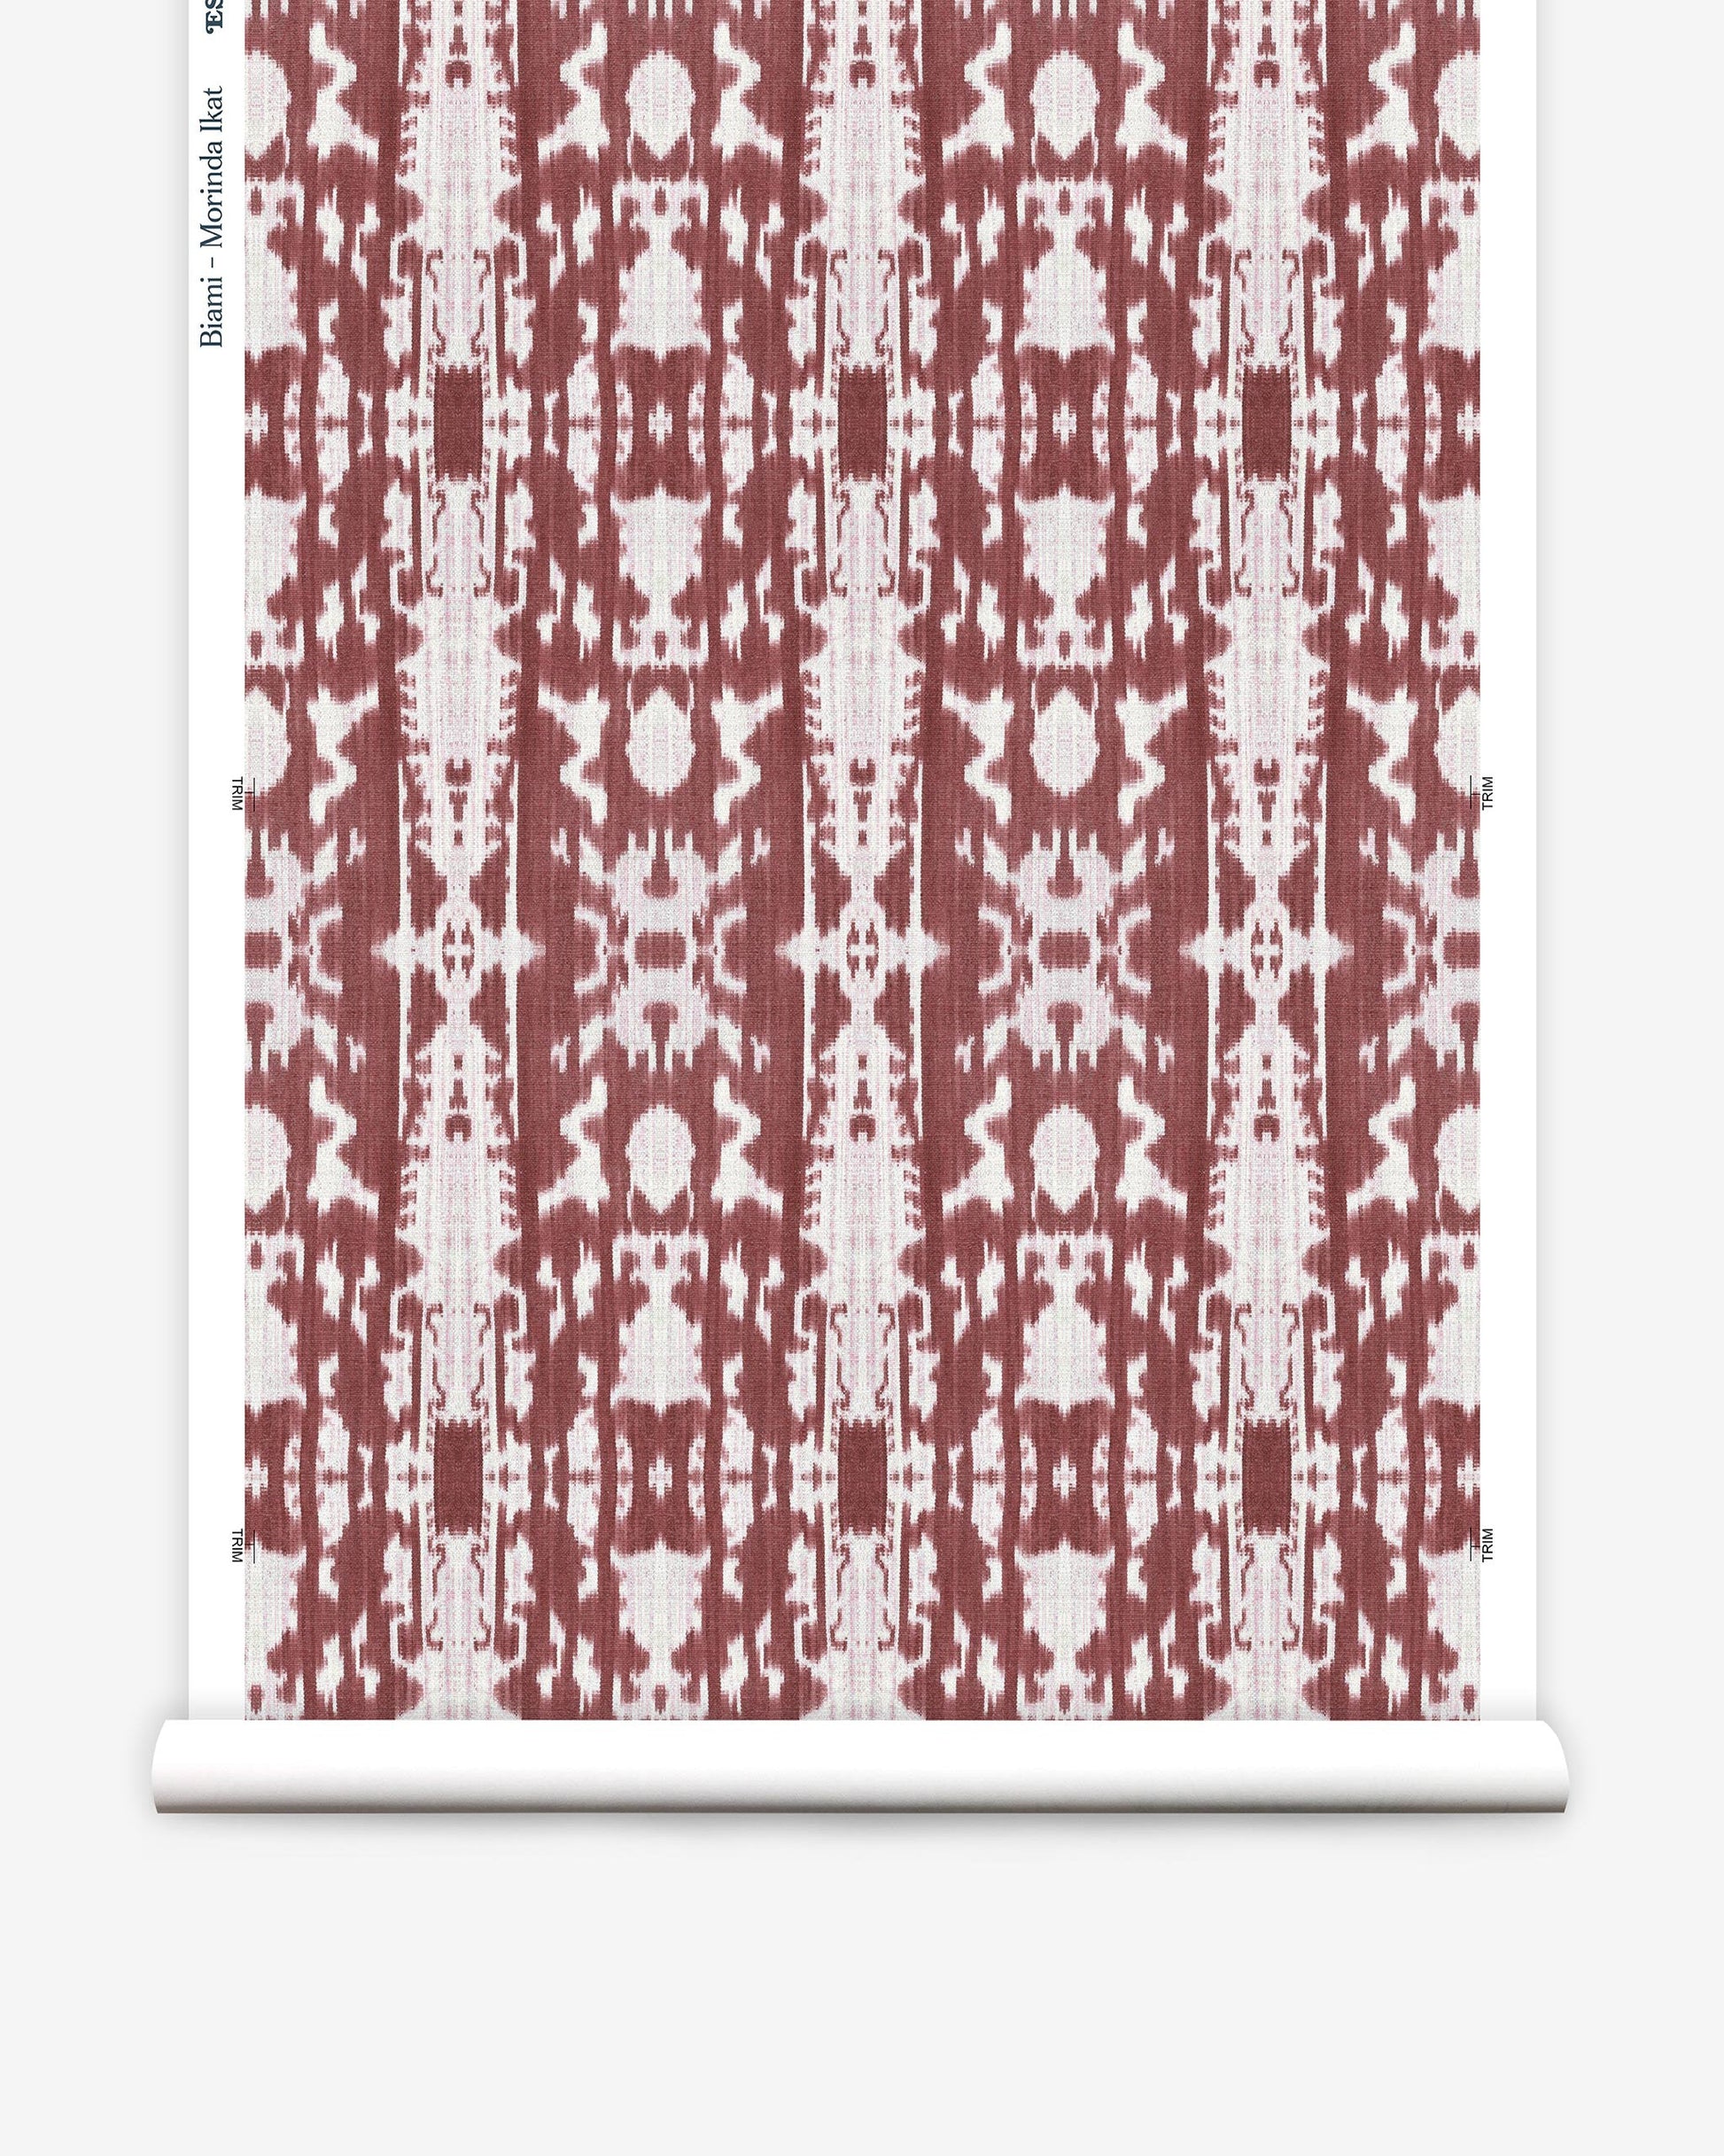 A red and white Biami Wallpaper pattern on a sheet of luxury fabric.
or
A red and white Morinda Ikat pattern on a sheet of luxury fabric.